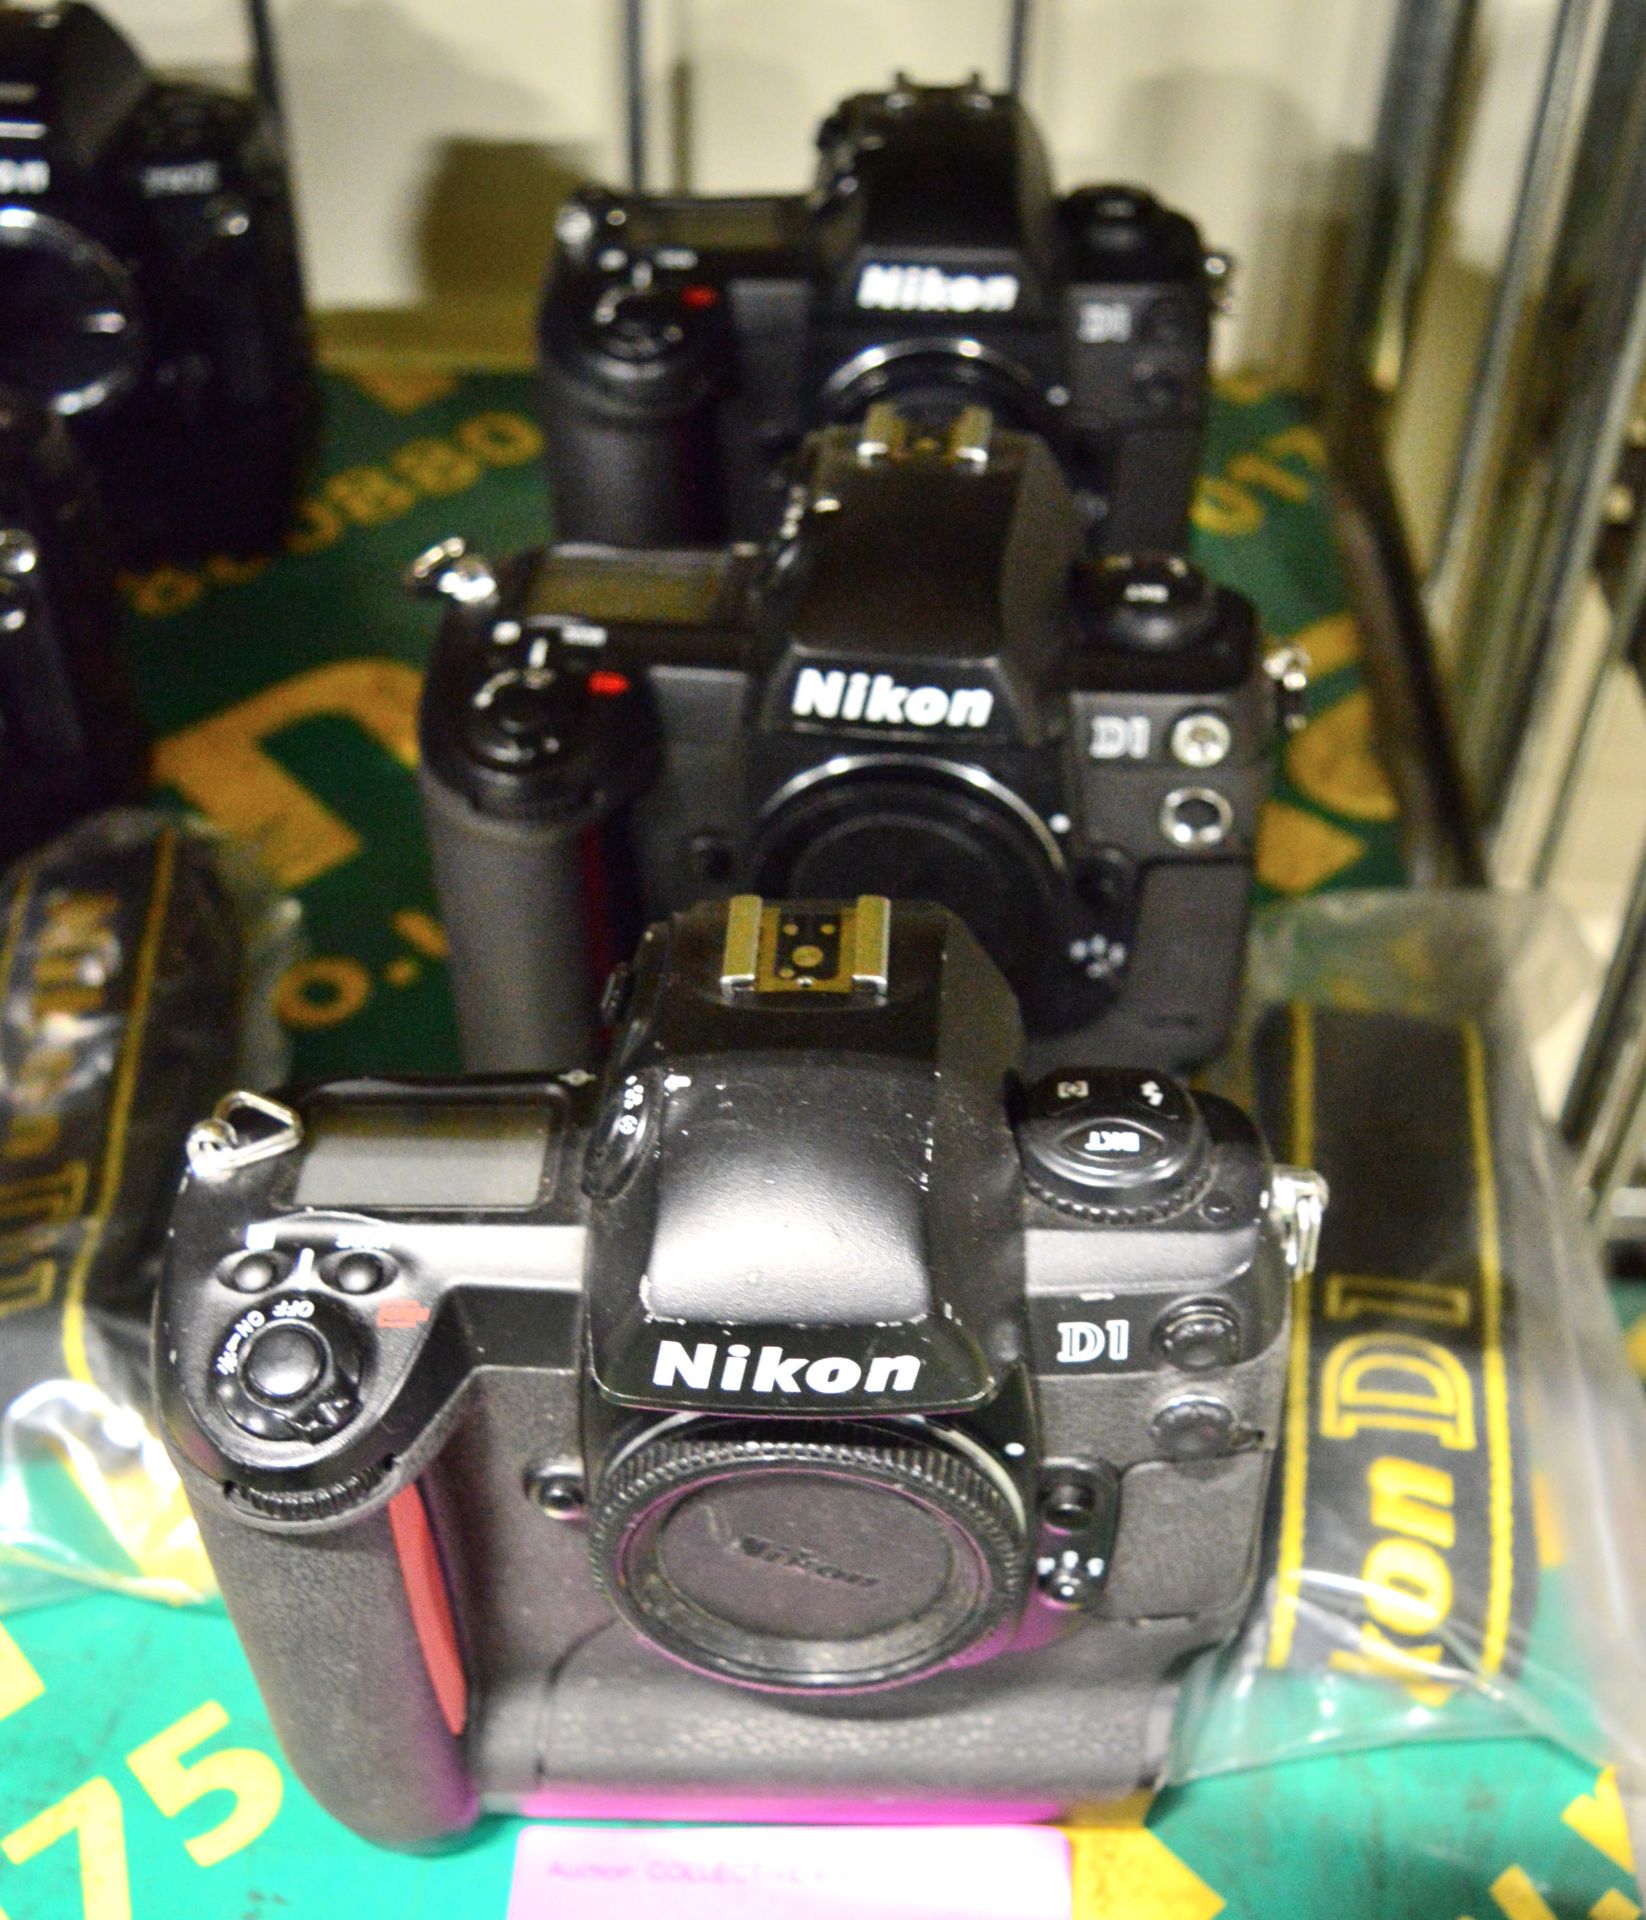 3x Nikon D1 Digital Camera Bodies with Battery Boxes. Strap.